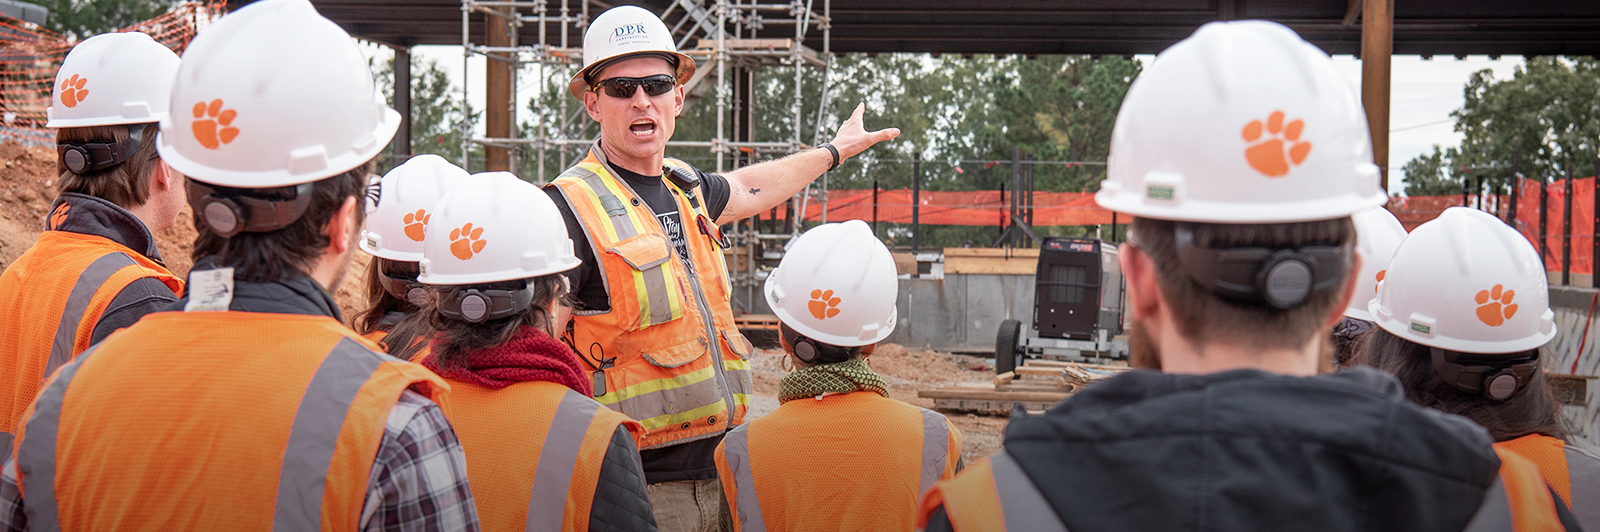 A DPR representative is seen pointing to the construction behind him as a group of students in white hardhats with an orange Tiger Paw are seen in the foreground.